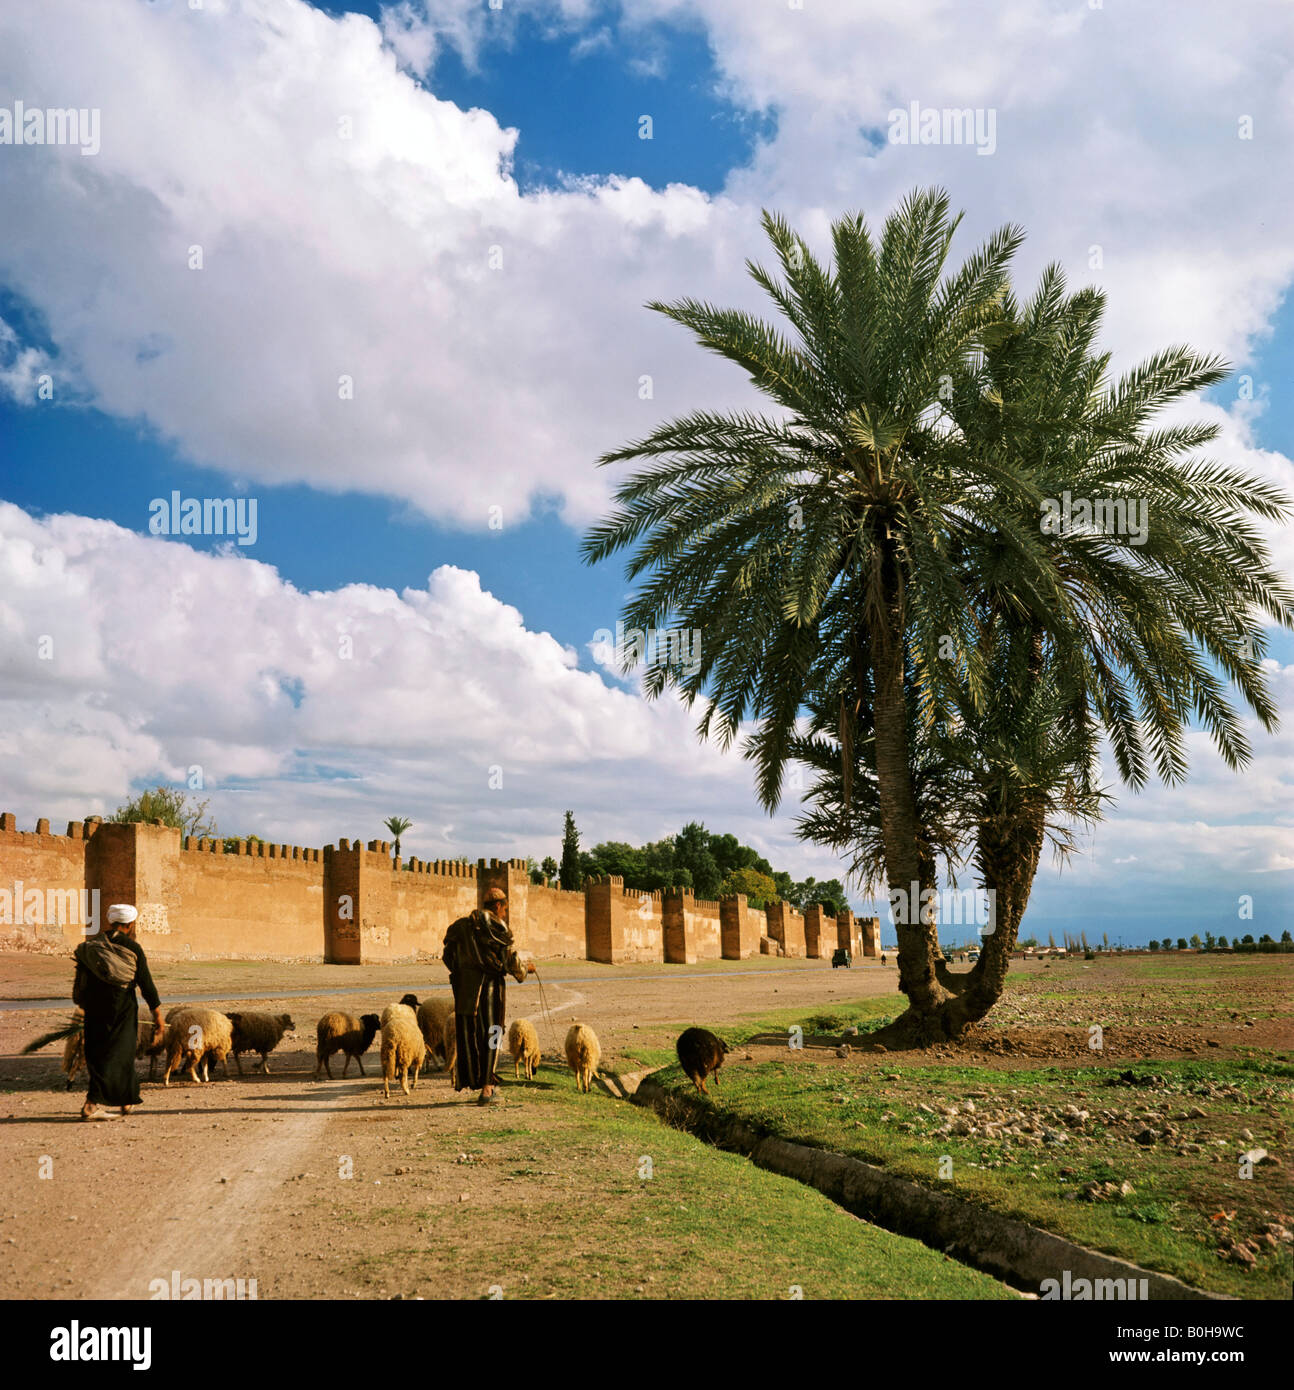 City walls surrounding Marrakech and palm trees, shepherd with sheep, Marrakesh, Morocco Stock Photo